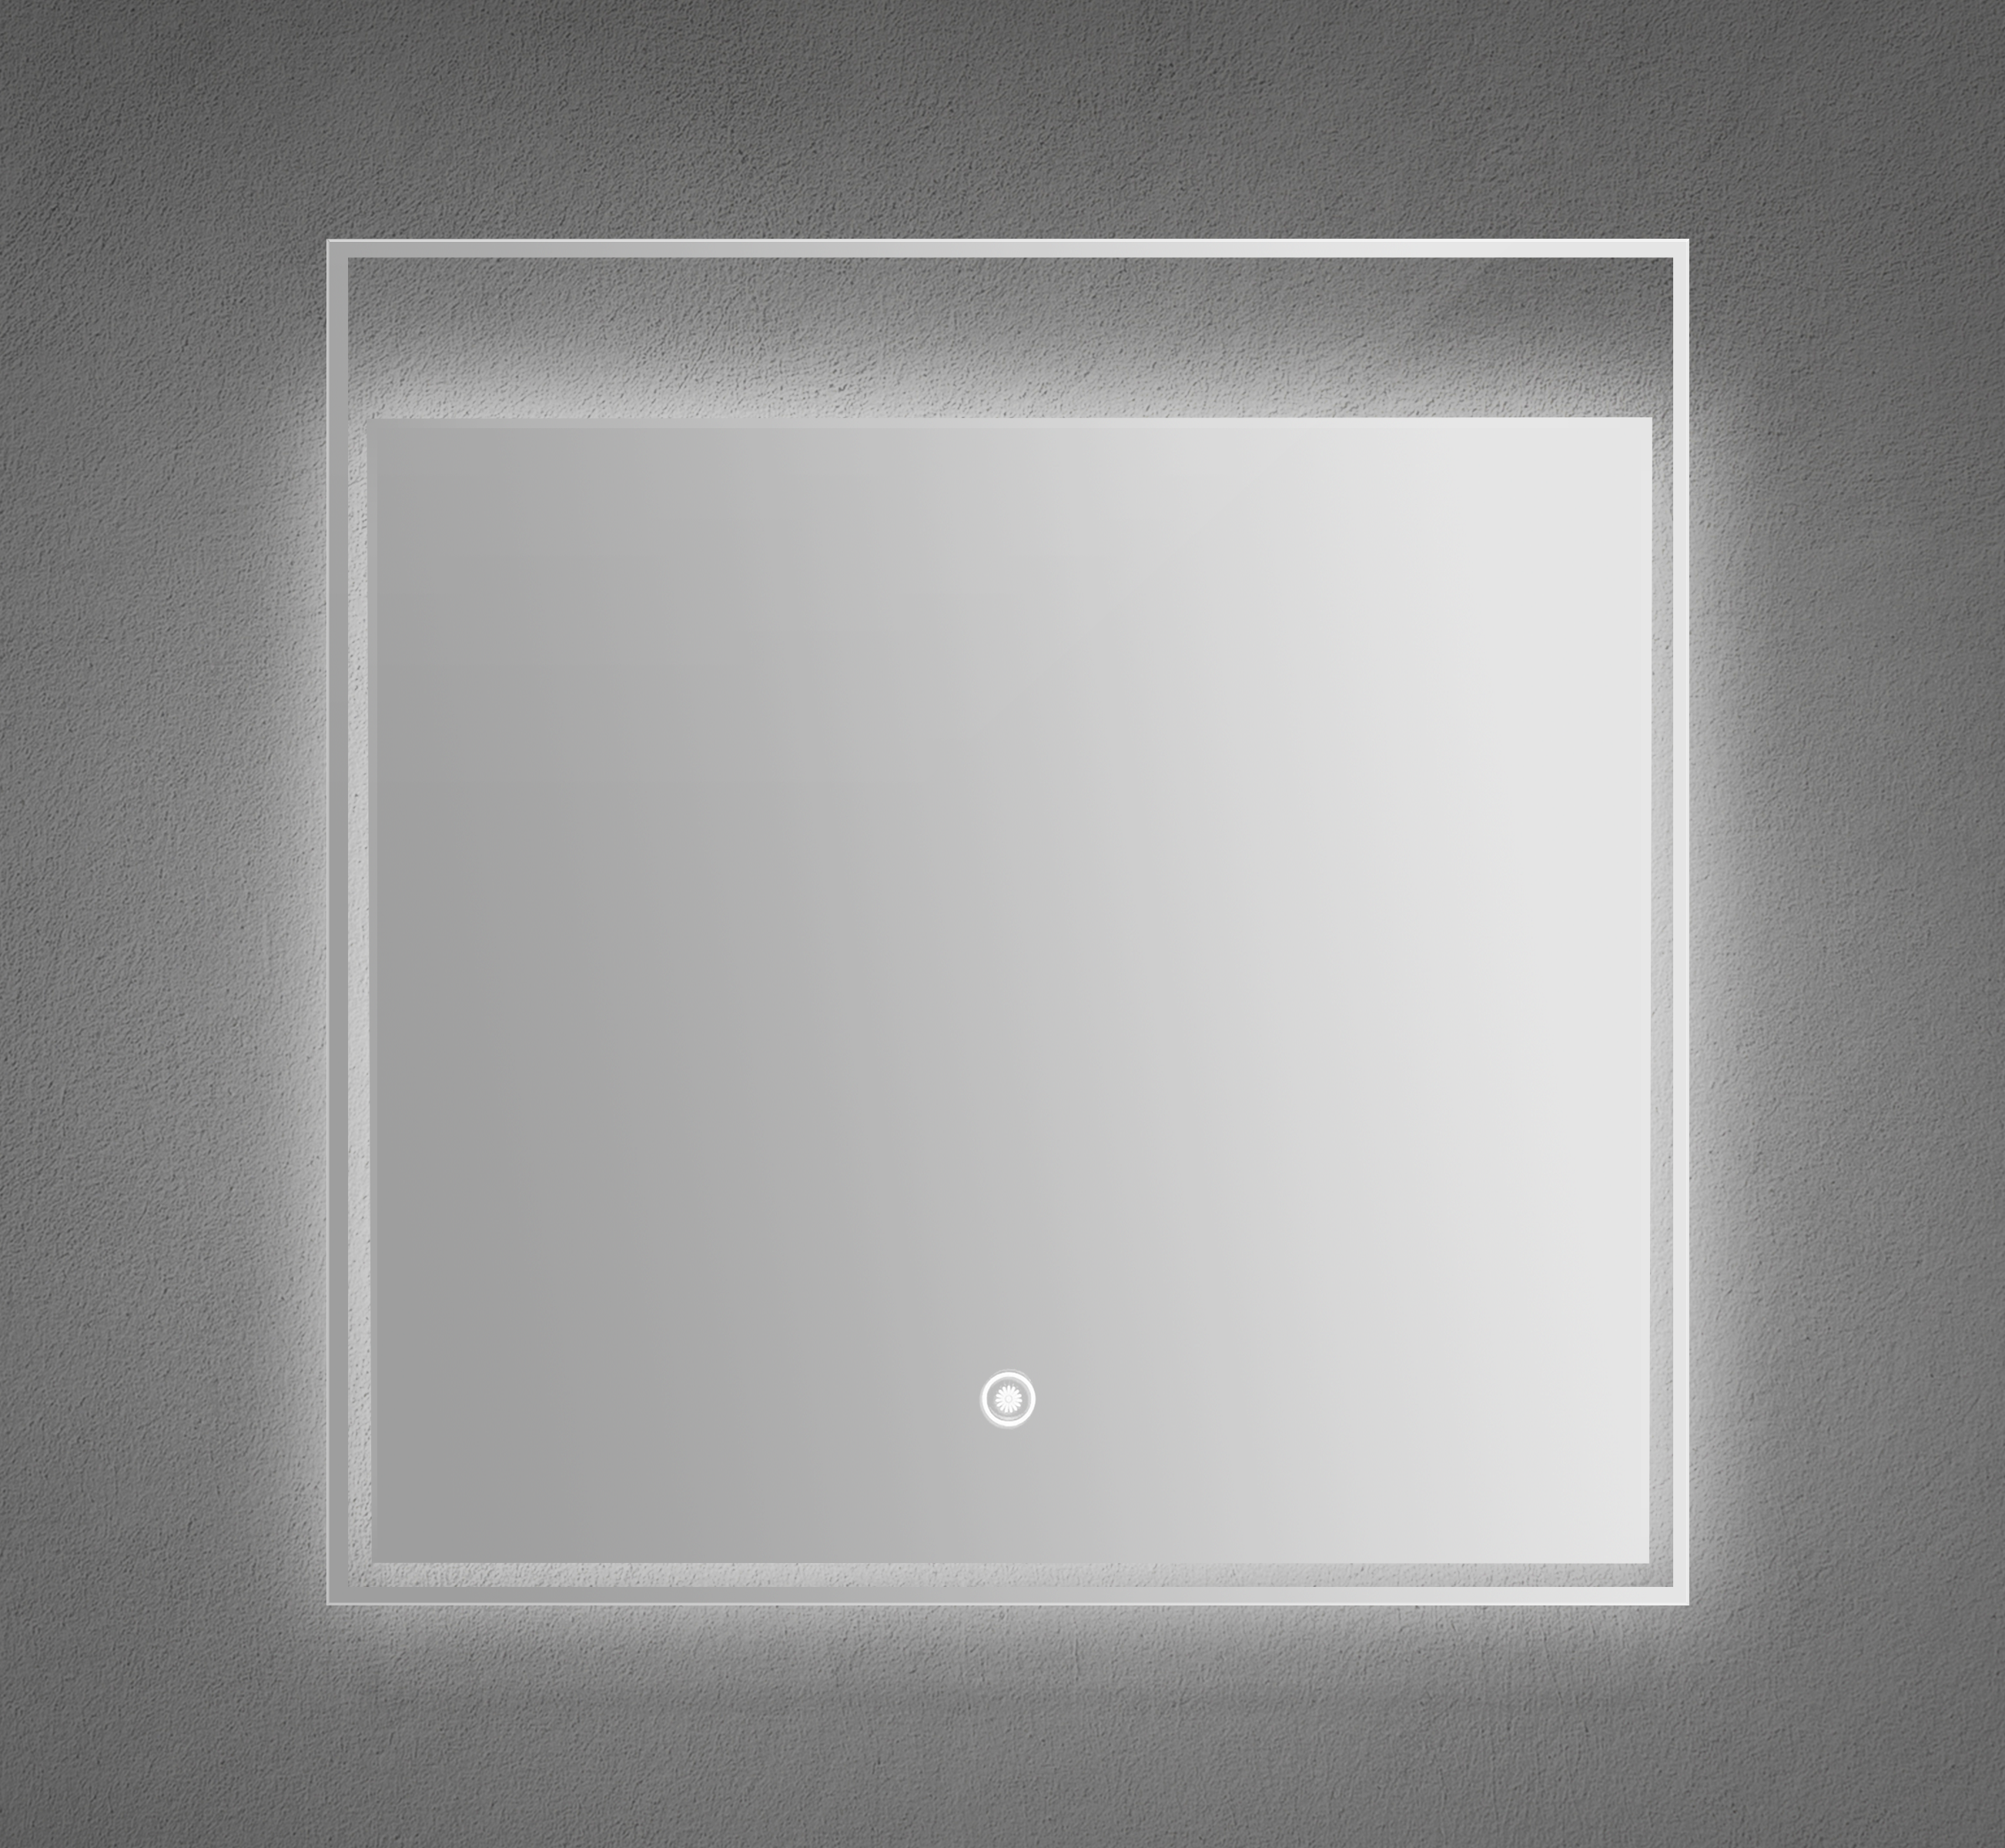 24" x 24" LED Mirror with Aluminum Frame